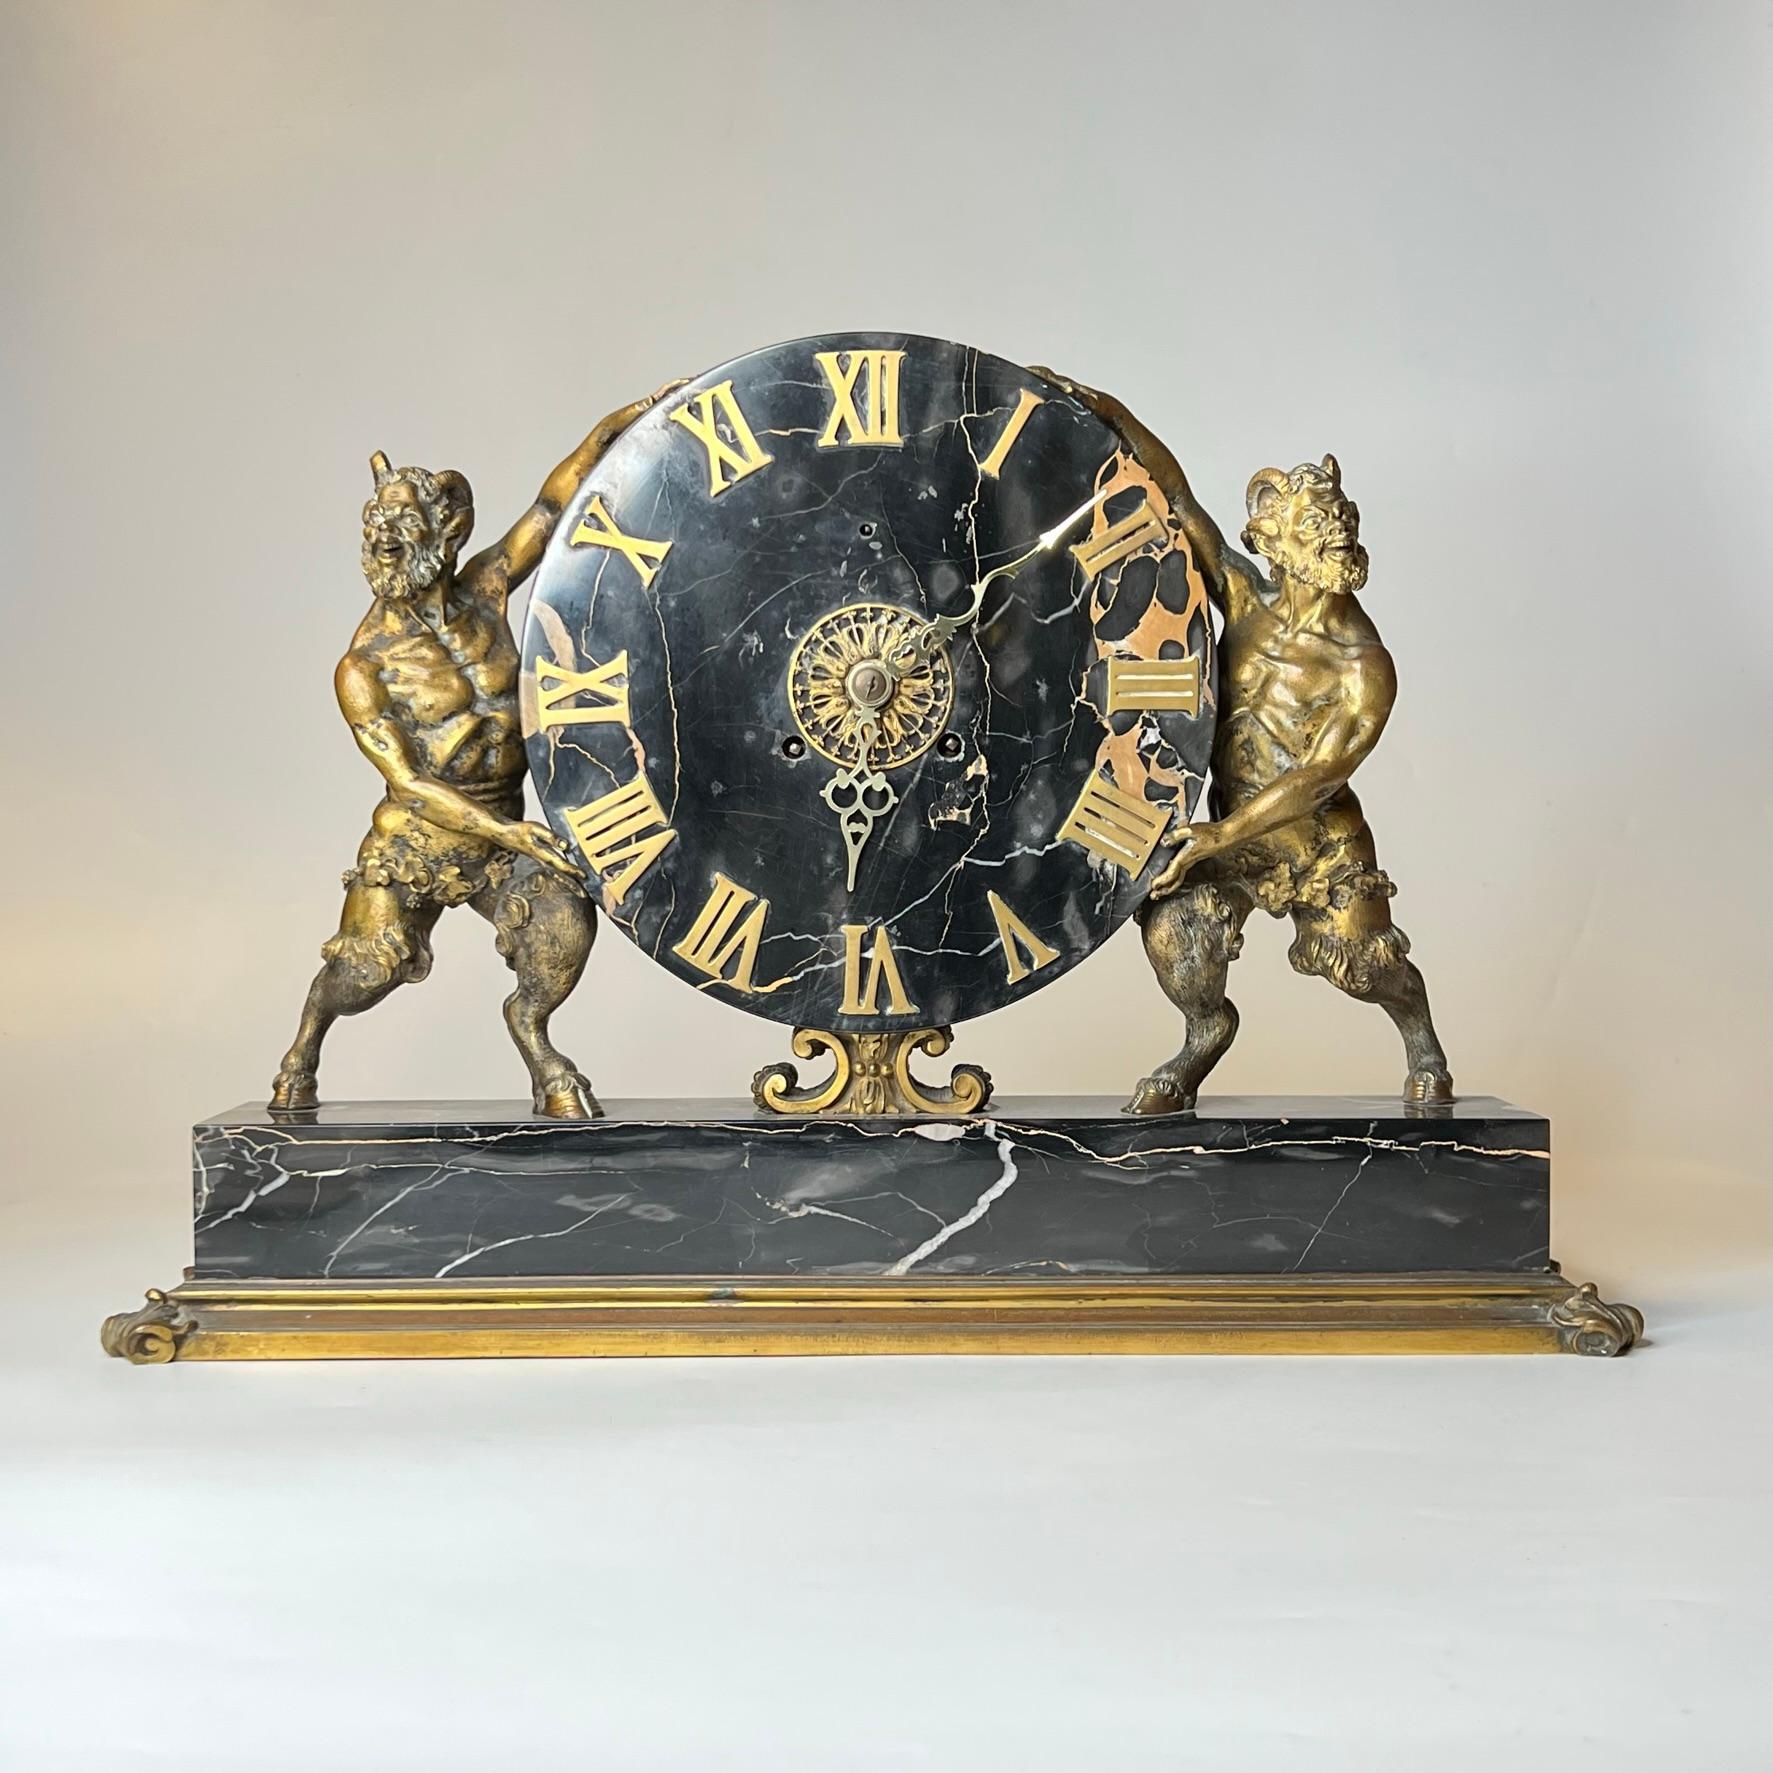 Our mantel clock in the Greek Revival style is crafted from marble and gilt bronze and features a large dial with Roman numerals supported on each side by satyr figures. Signed on the reverse. In good condition.